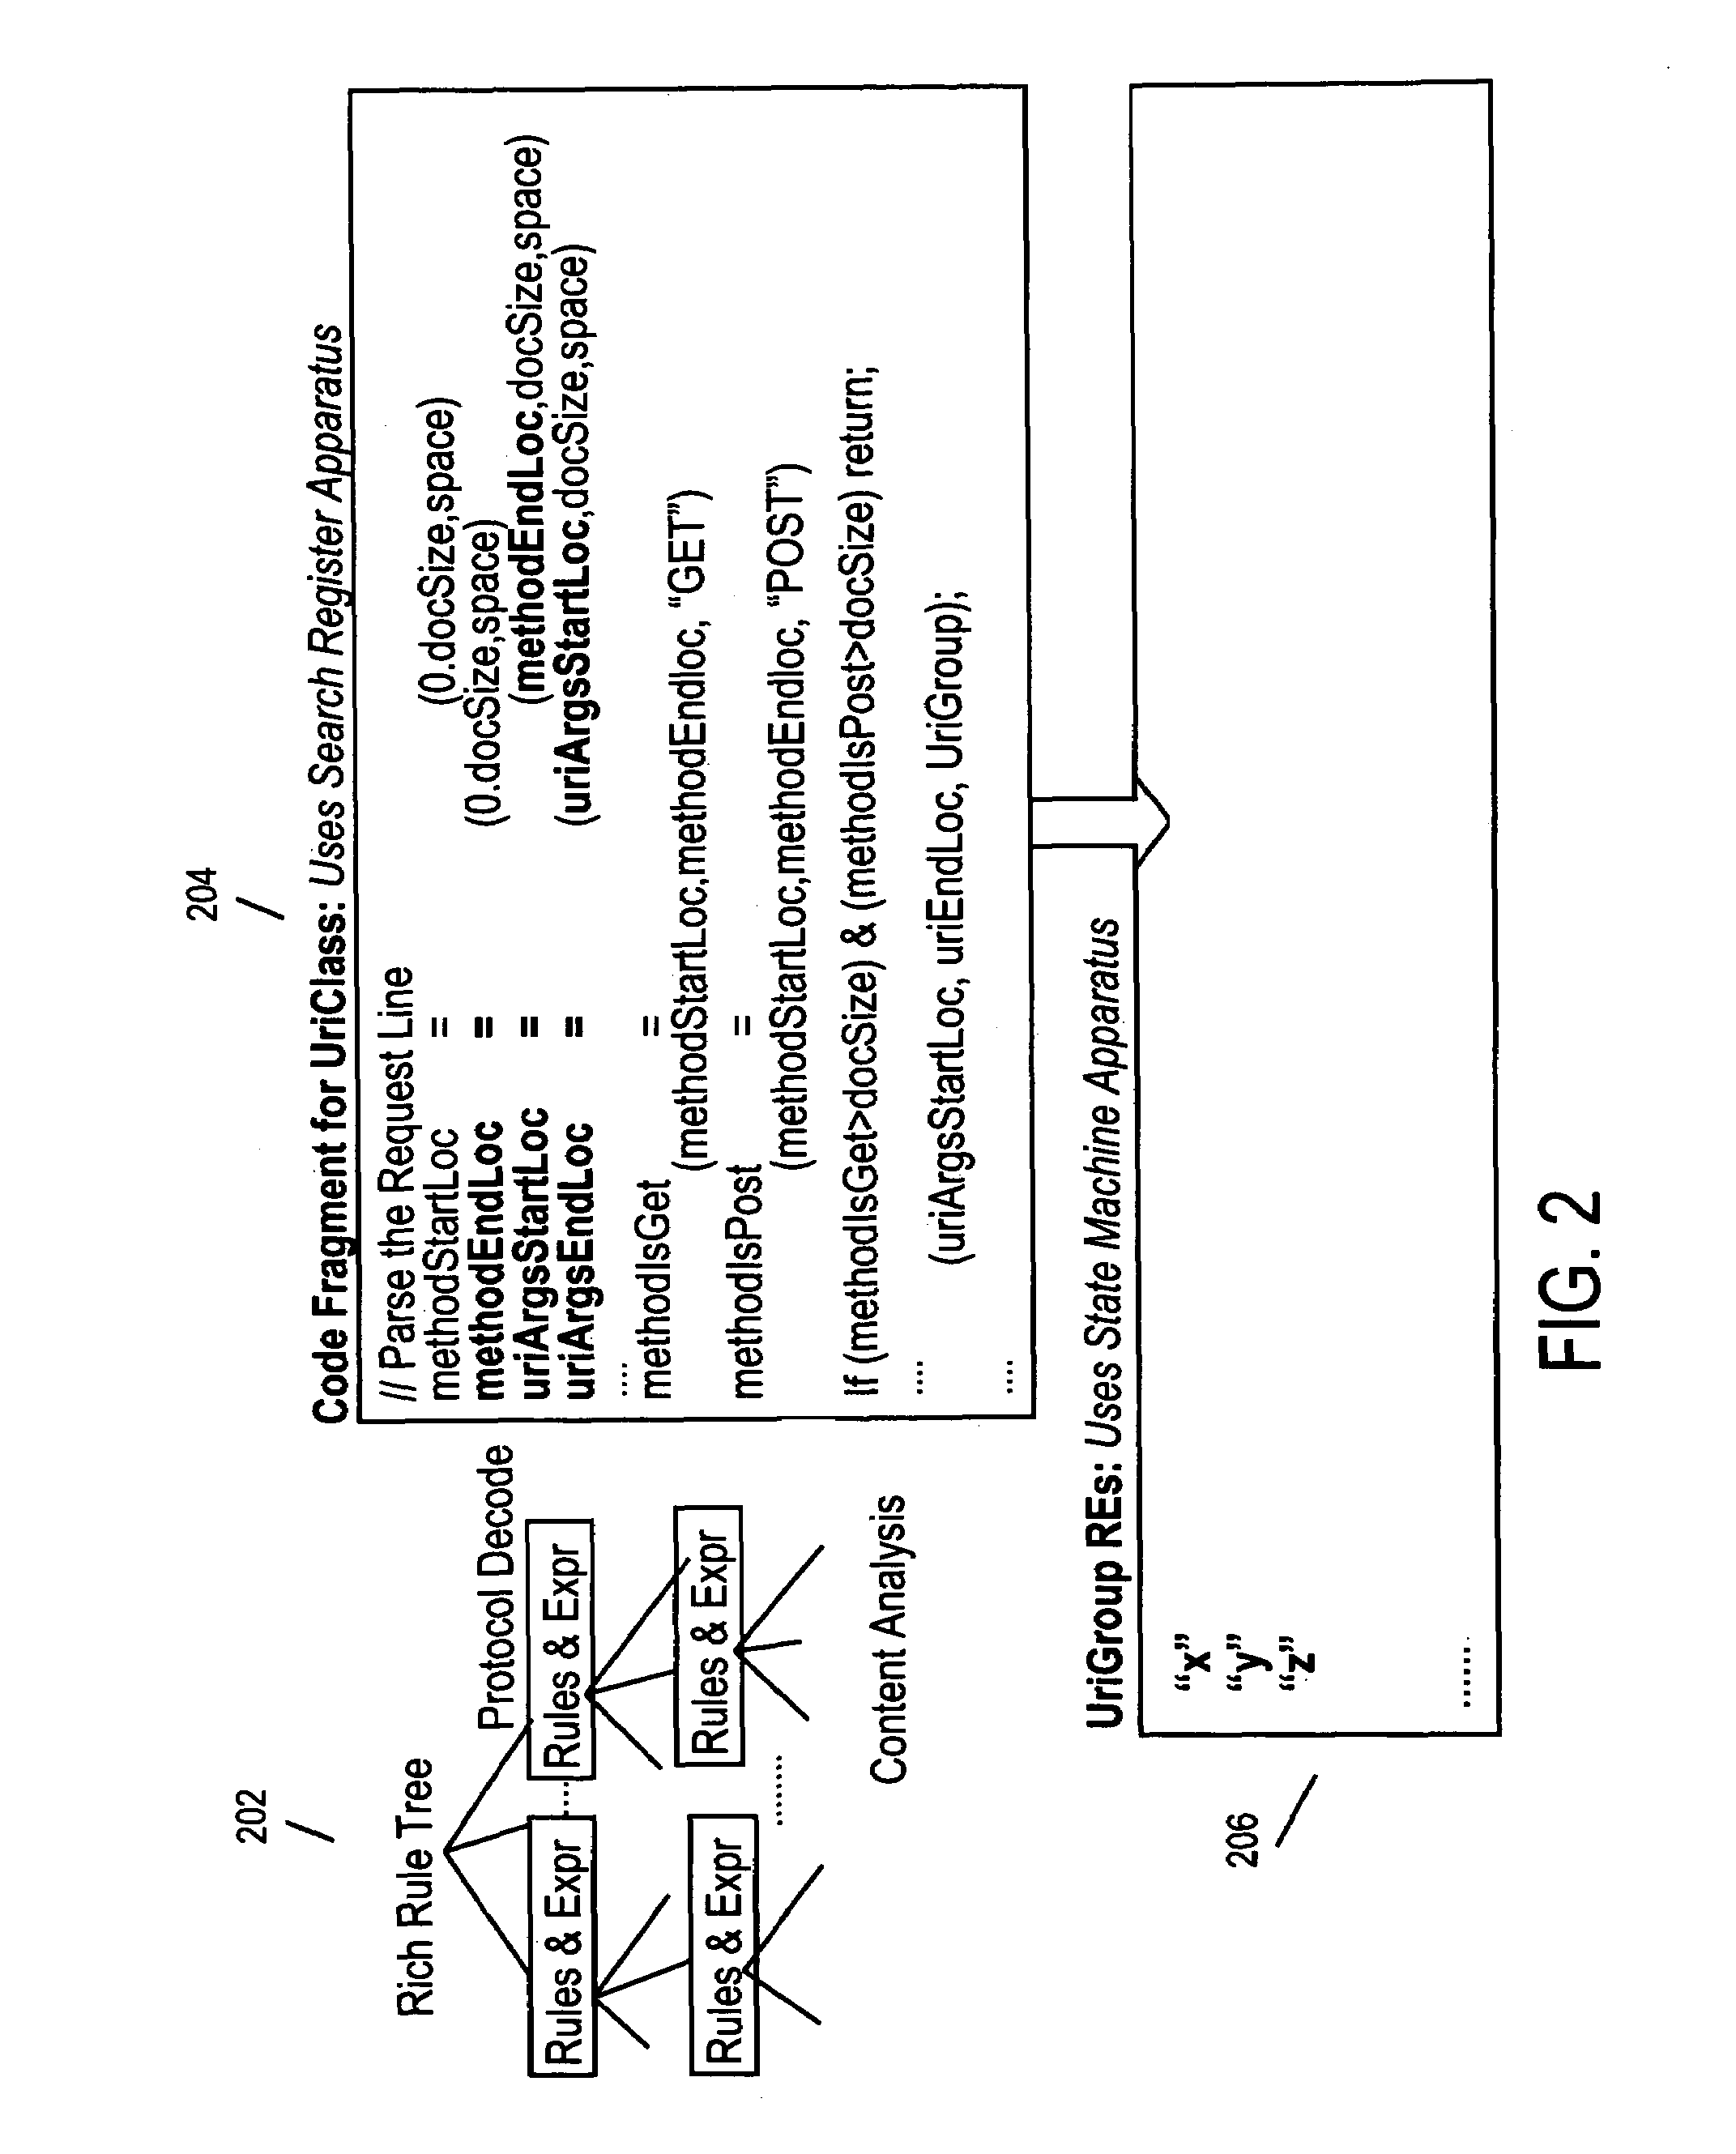 Programmable processor apparatus integrating dedicated search registers and dedicated state machine registers with associated execution hardware to support rapid application of rulesets to data